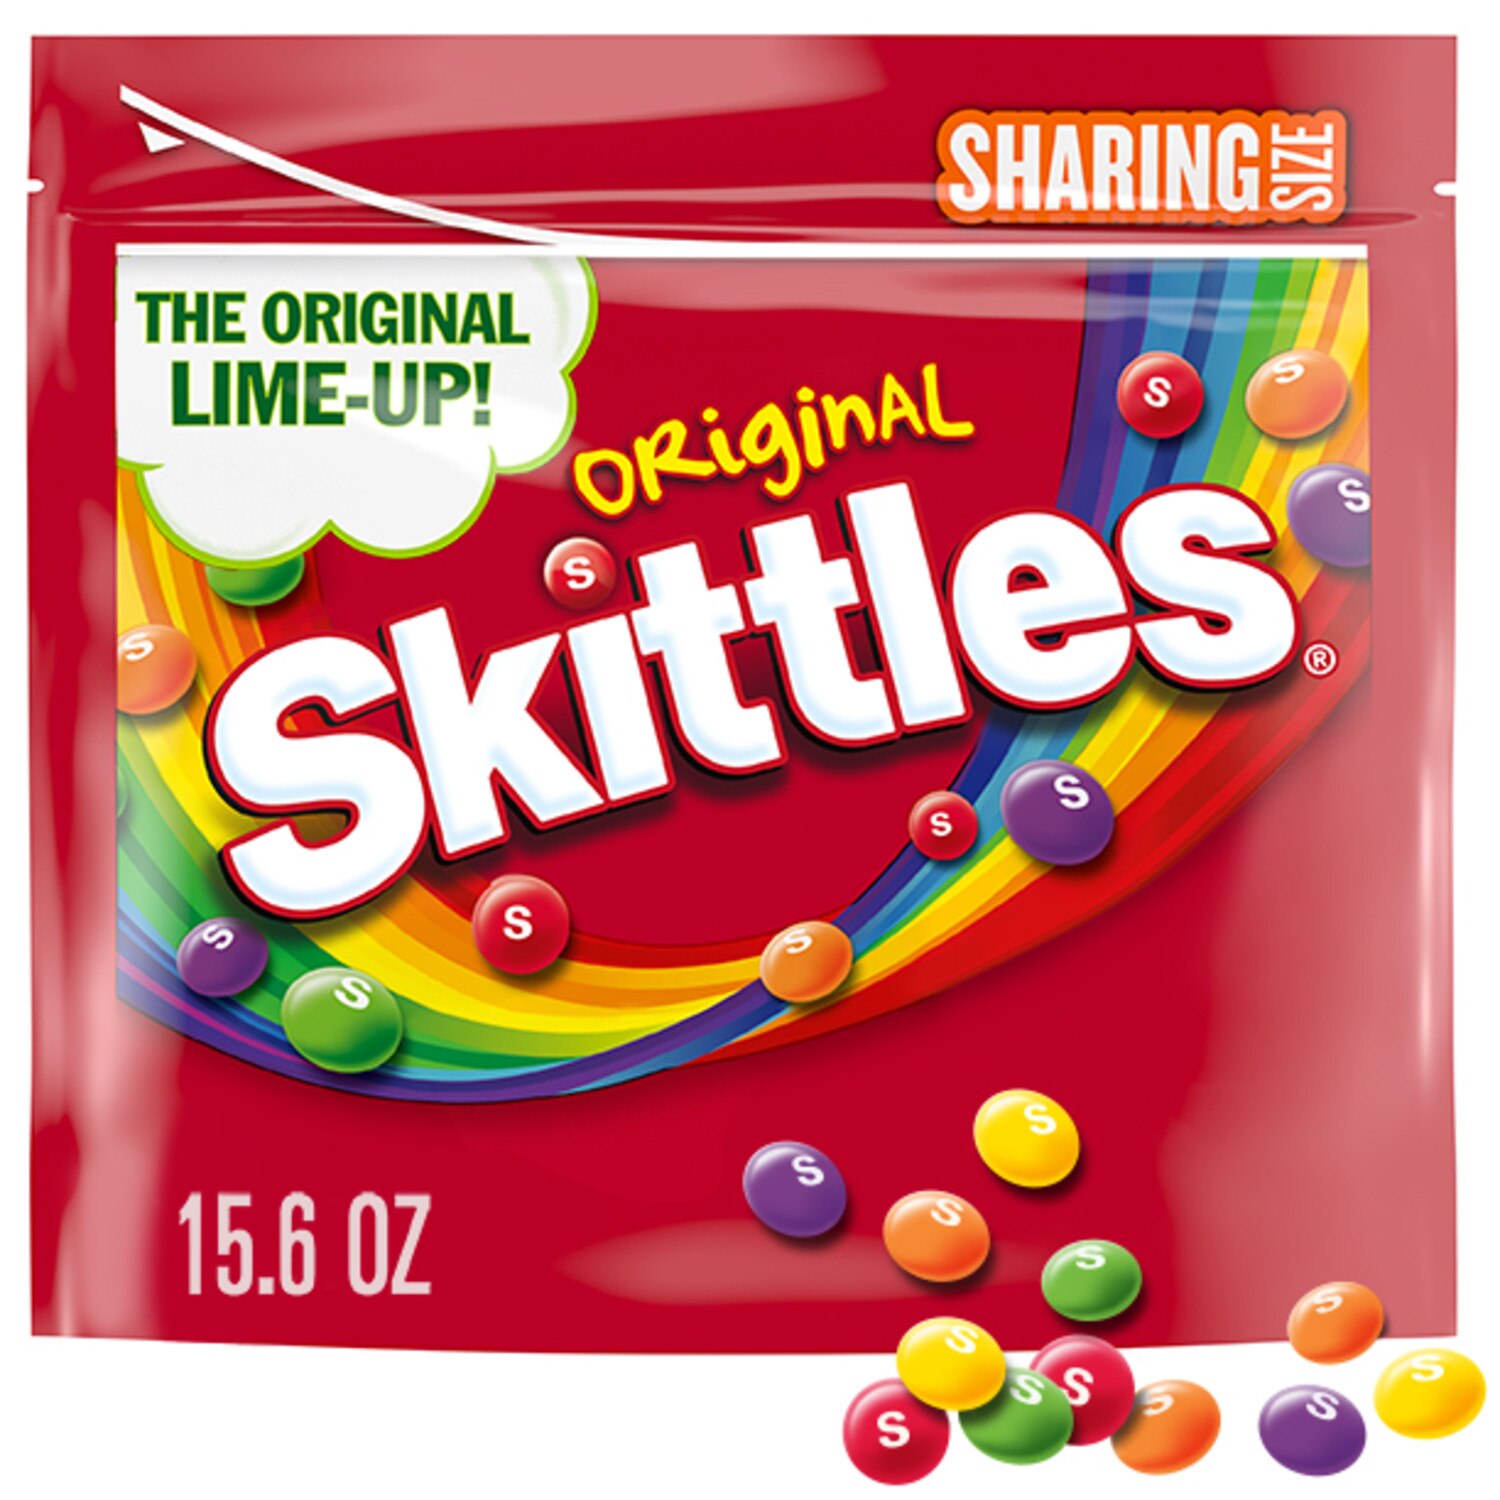 SKITTLES Original Fruity Chewy Candy, 15.6 oz Sharing Size Bag